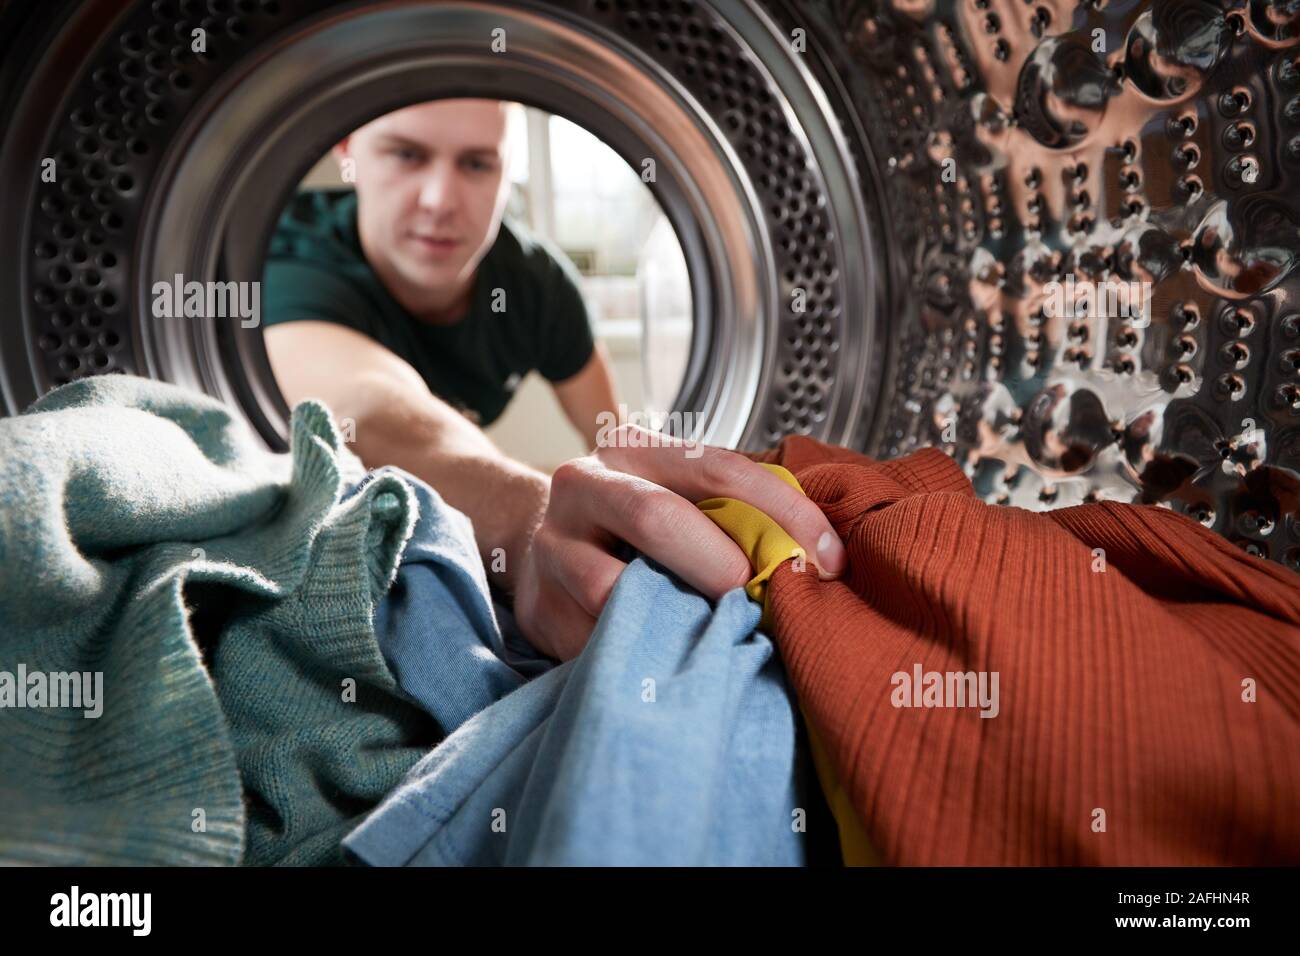 View Looking Out From Inside Washing Machine As Young Man Does Laundry Stock Photo